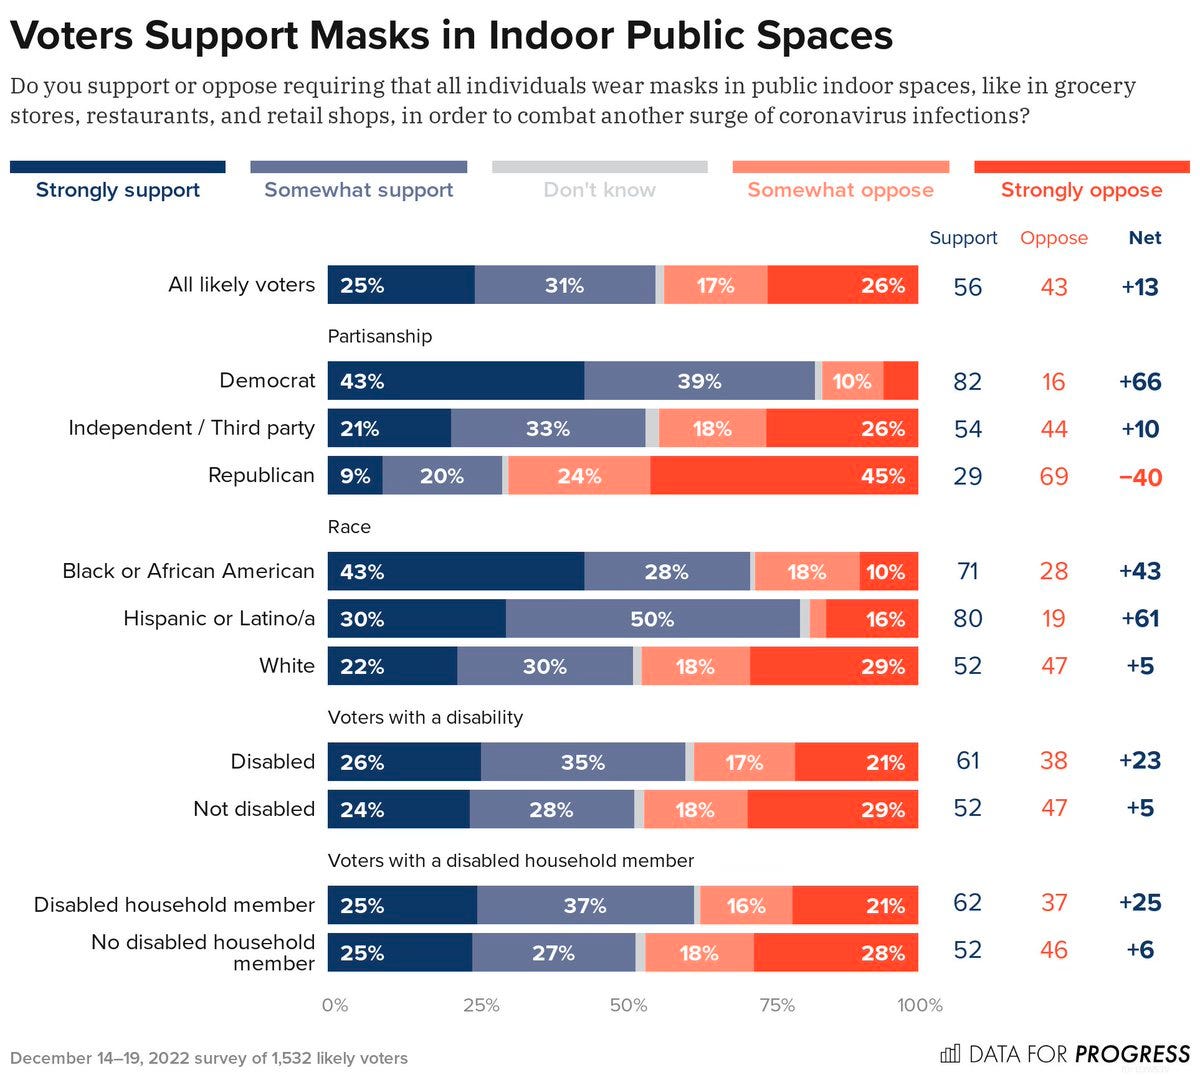 Bar chart of polling data from Data For Progress.  Title: Voters Support Masks in Indoor Public Spaces.  Description: Do you support or oppose requiring that all individuals wear masks in public indoor spaces, like in grocery stores, restaurants, and retail shops, in order to combat another surge of coronavirus infections?  All likely voters — Support: 55%, Oppose: 43%  Democrat — Support: 83%, Oppose: 16%  Independent / Third party — Support: 54%, Oppose: 44%  Republican — Support: 29%, Oppose: 69%  Black or African American — Support: 71%, Oppose: 28%  Hispanic or Latino/a — Support: 80%, Oppose: 18%  White — Support: 52%, Oppose: 47%  Disabled — Support: 61%, Oppose: 38%  Not disabled — Support: 52%, Oppose: 47%  Disabled household member — Support: 62%, Oppose: 37%